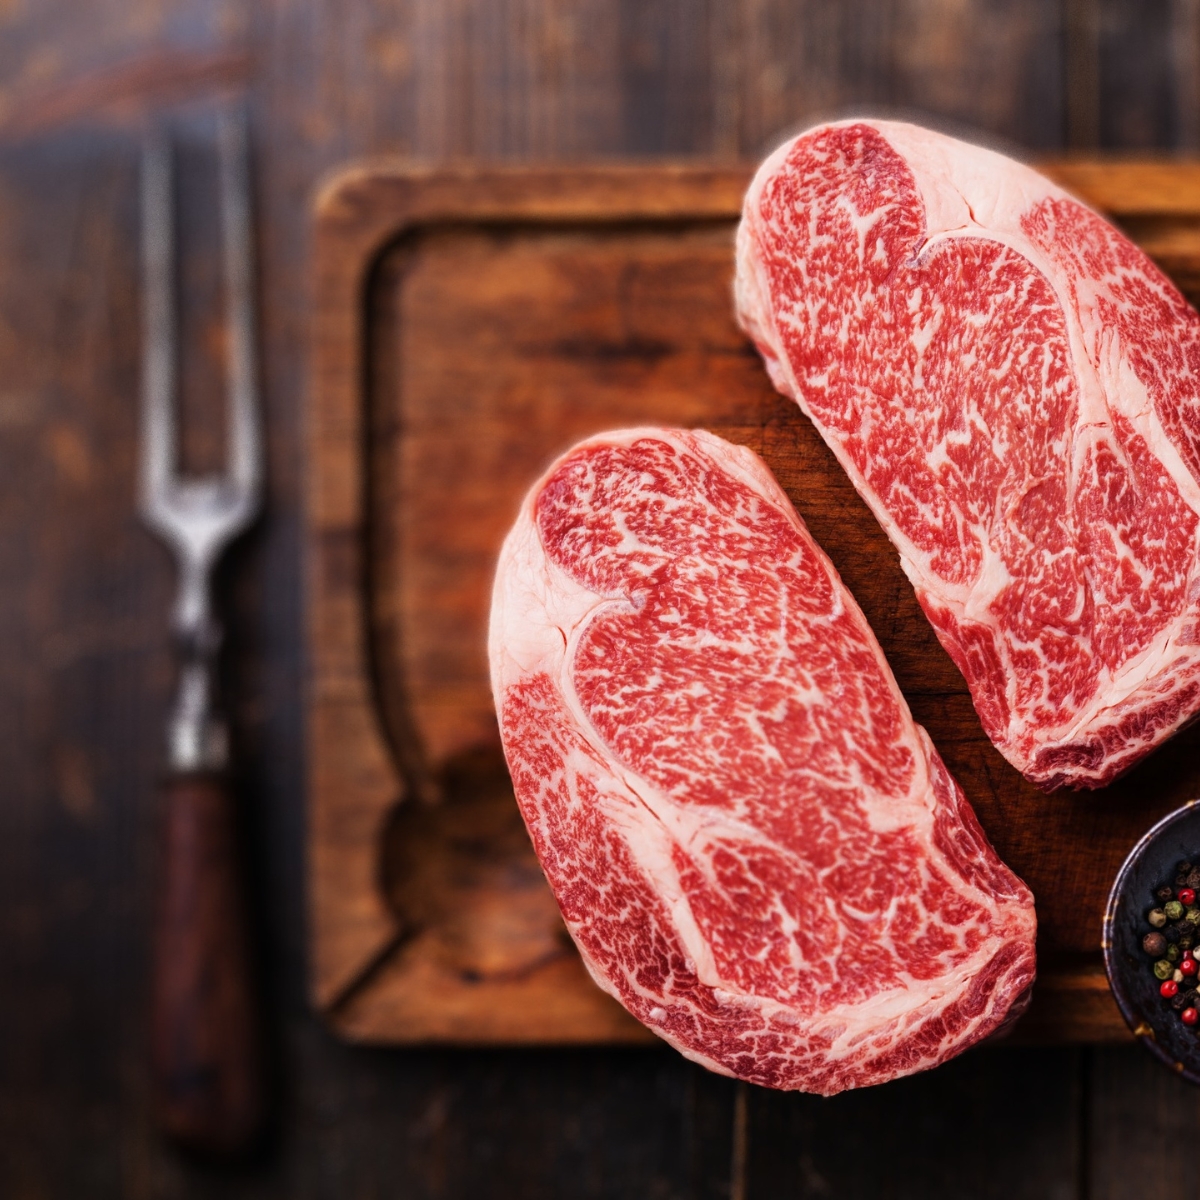 What is marbled meat